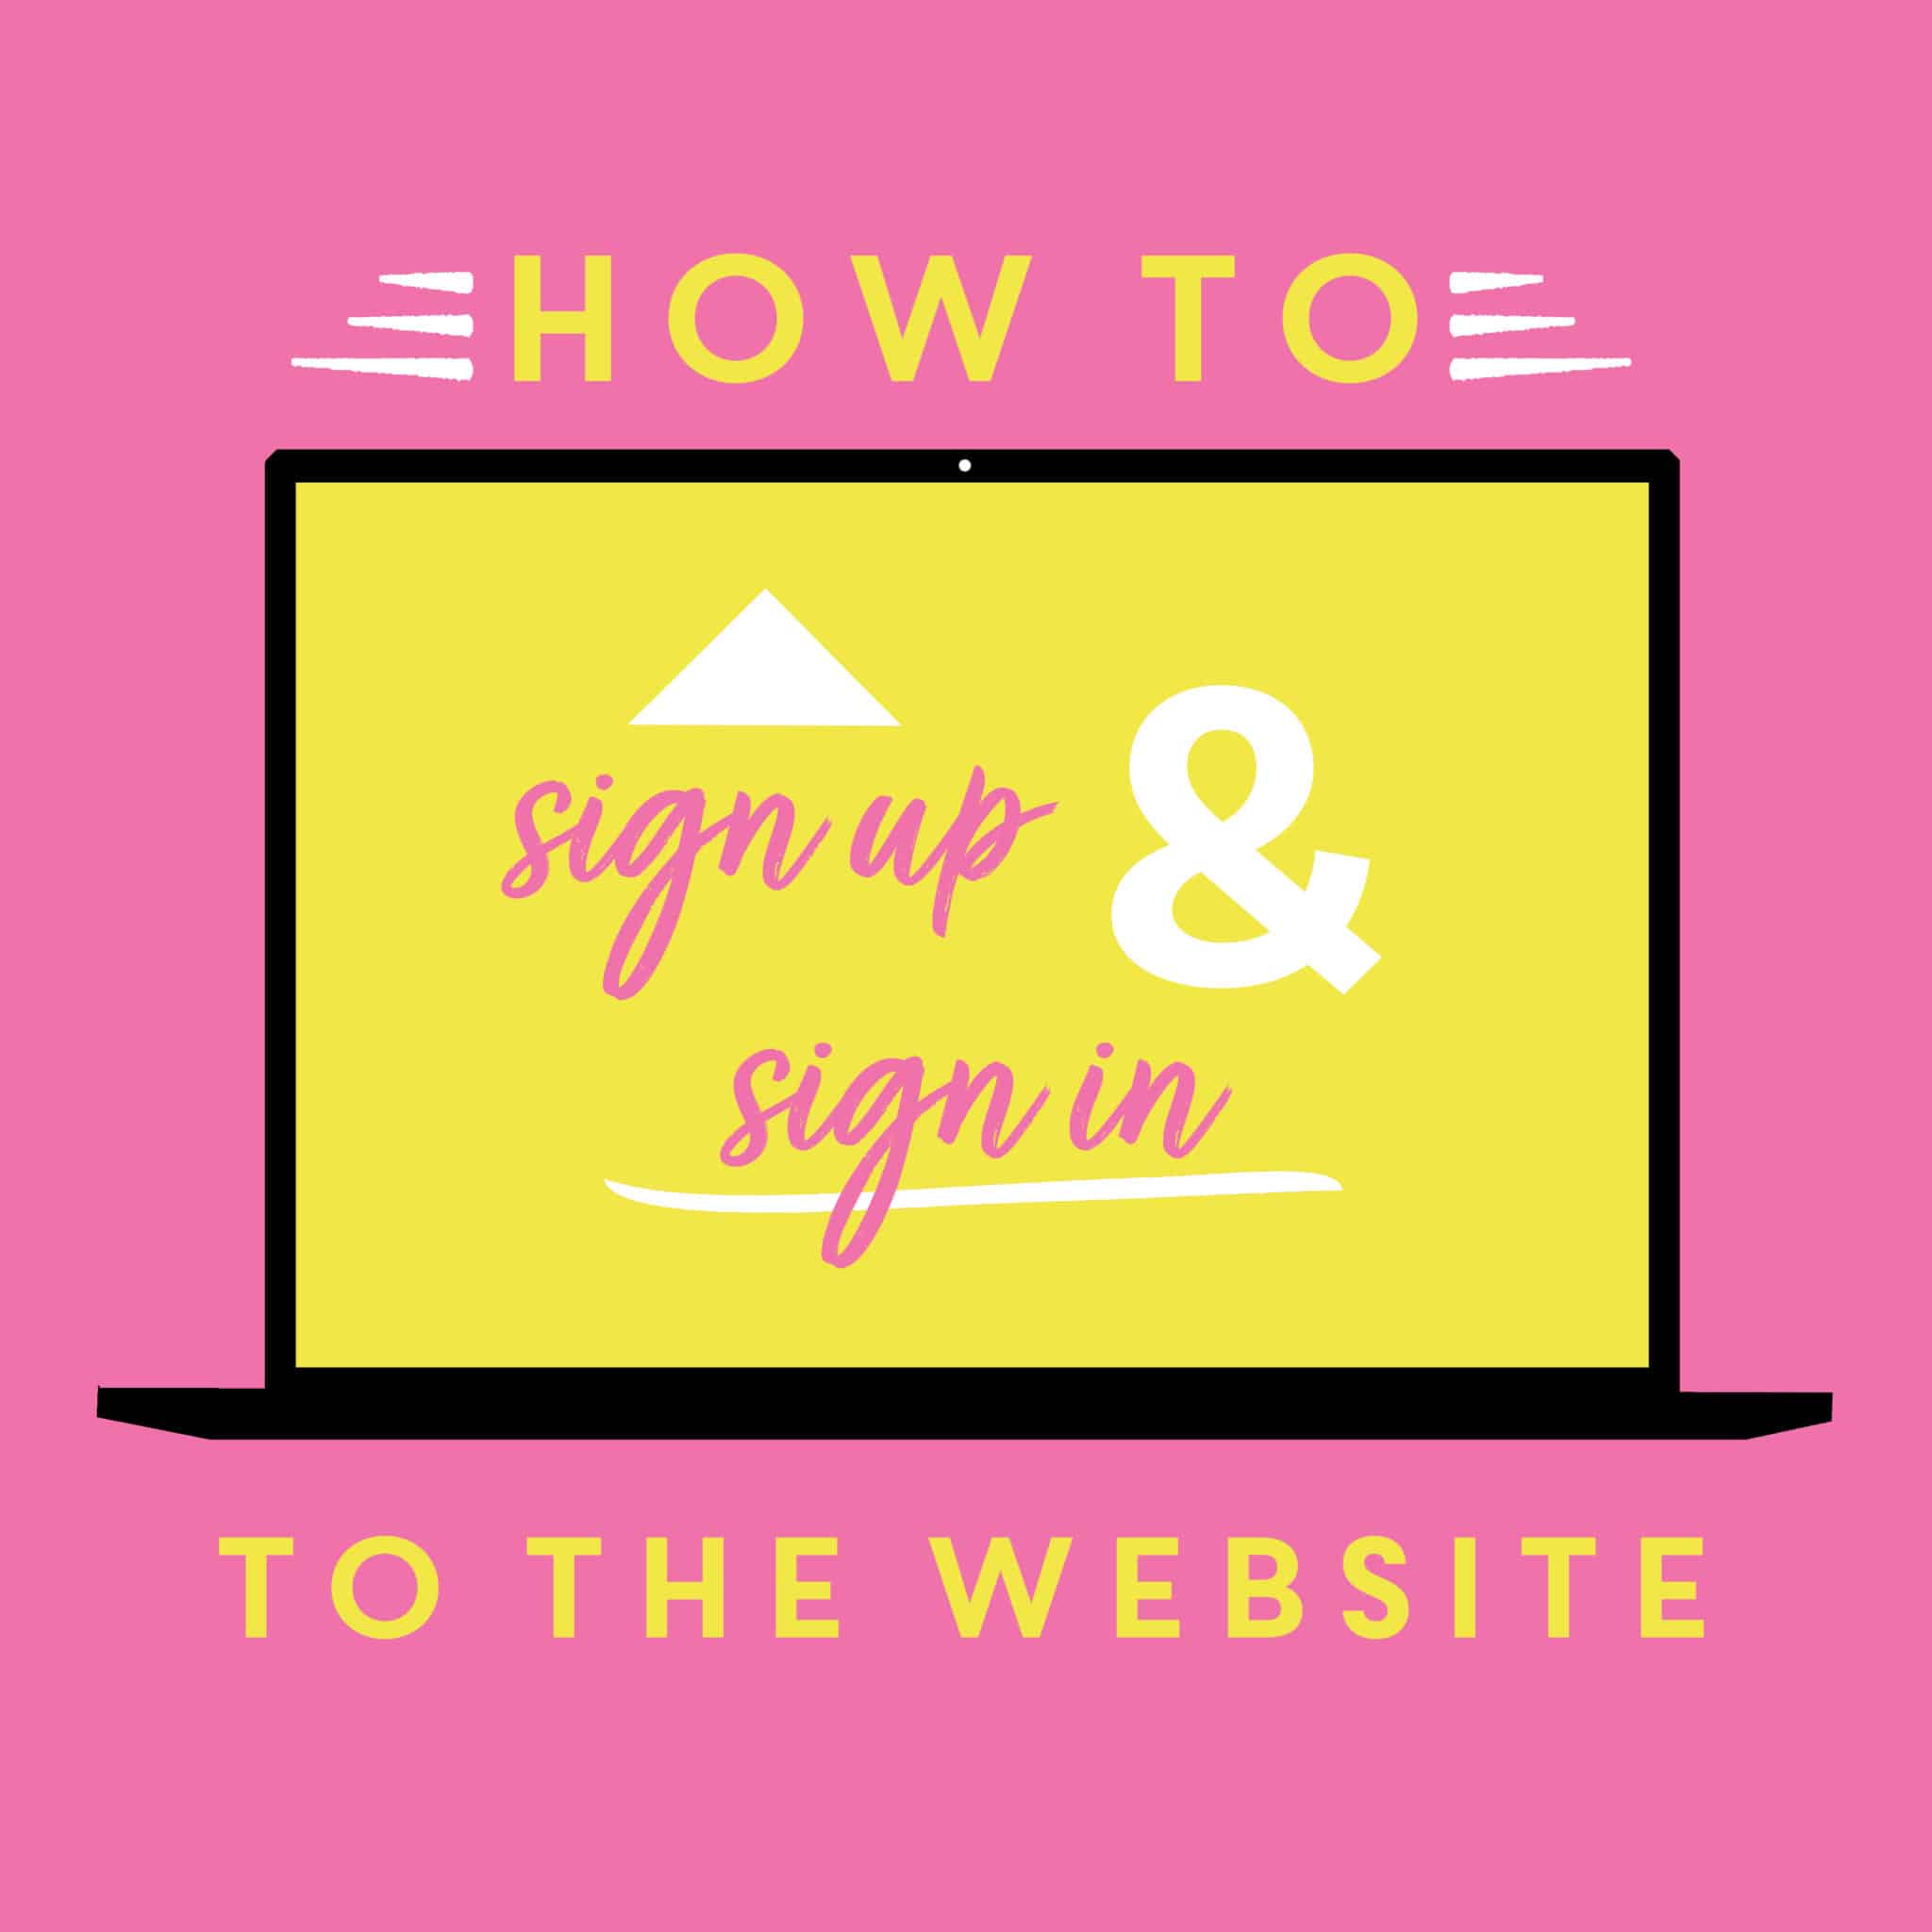 How to sign up to the website